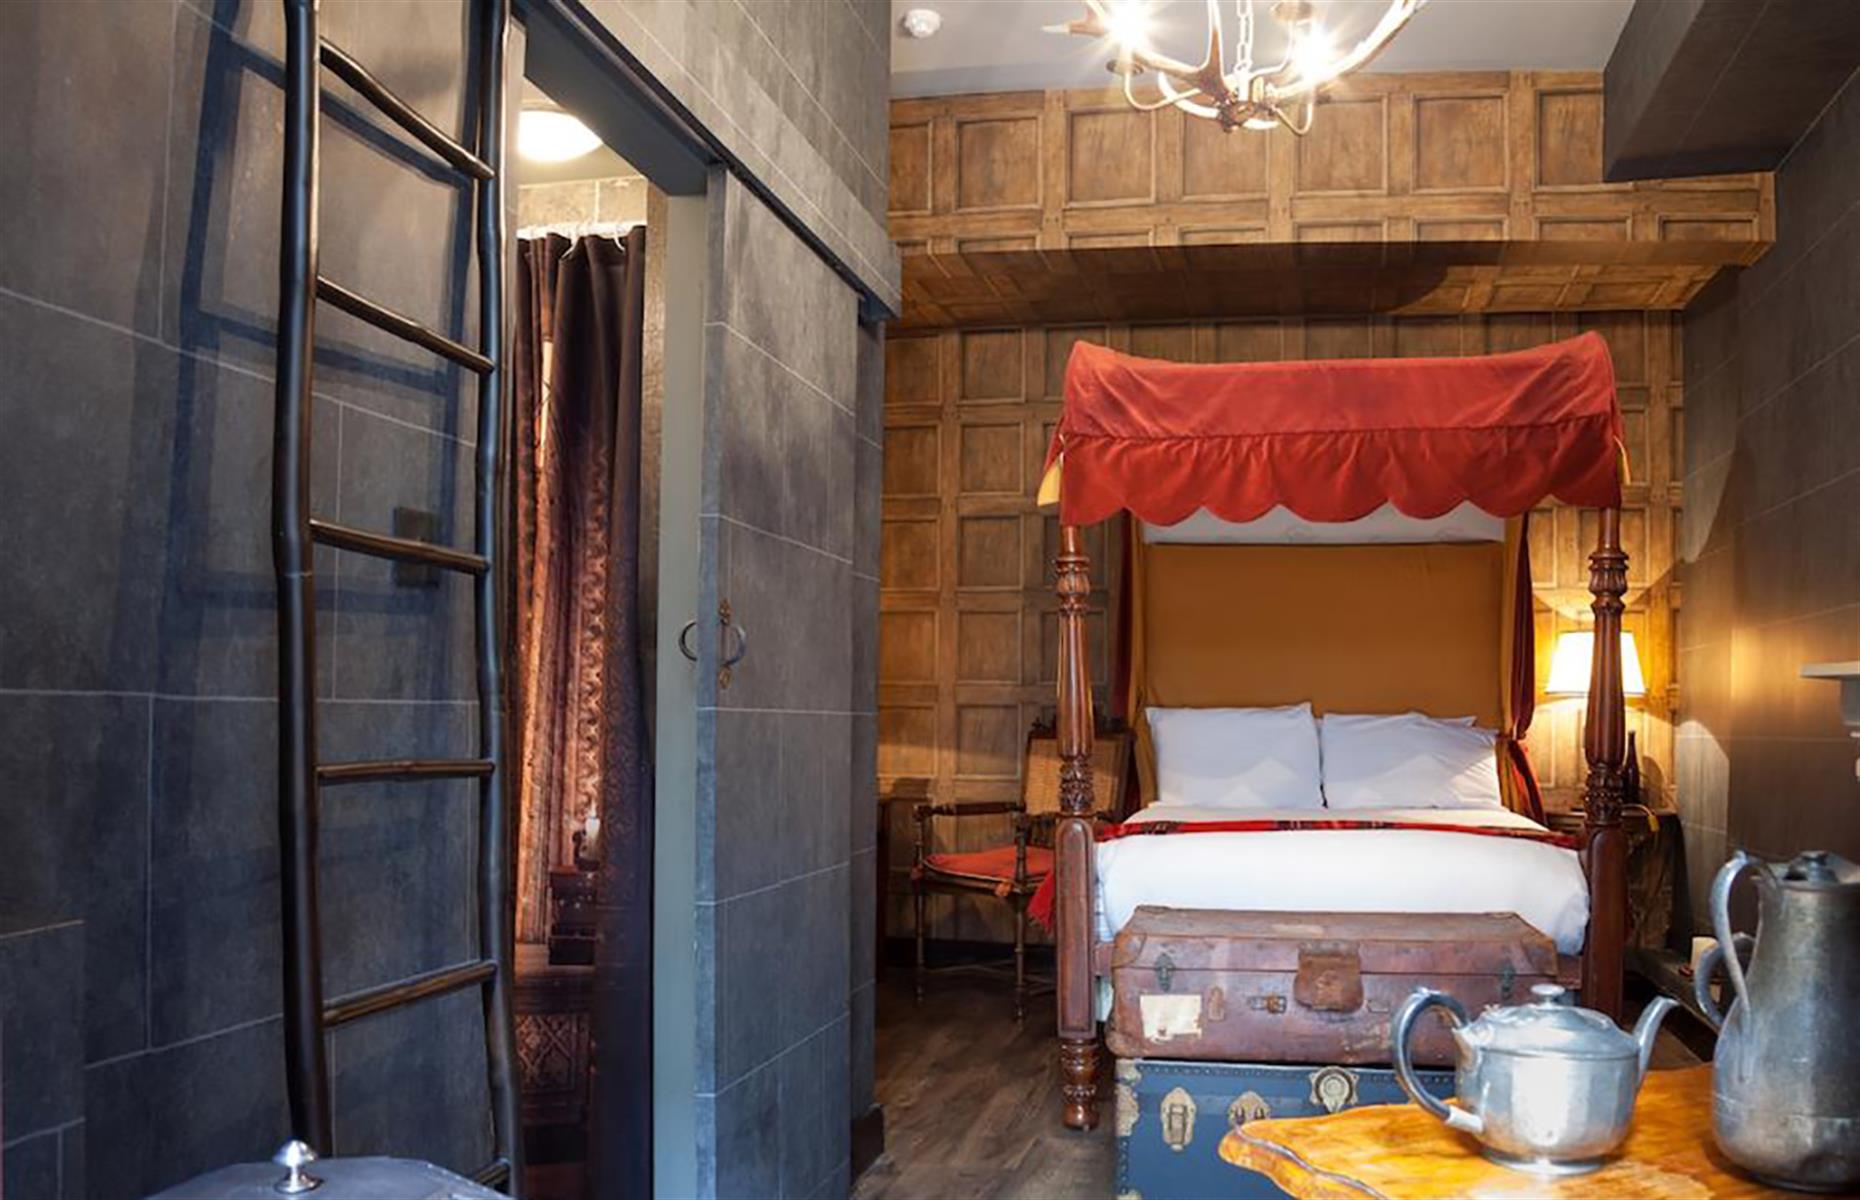 <p>You're a wizard, Harry! Or at least you can pretend to be one at <a href="https://www.booking.com/hotel/gb/georgianhousehotel.en-gb.html">The Georgian House Hotel</a> in London. Book a stay at the enchanted chamber or the family wizard chamber and be transported to one of the dormitories in Hogwarts School of Witchcraft and Wizardry. Don't forget to give the right password to The Fat Lady to gain access though...</p>